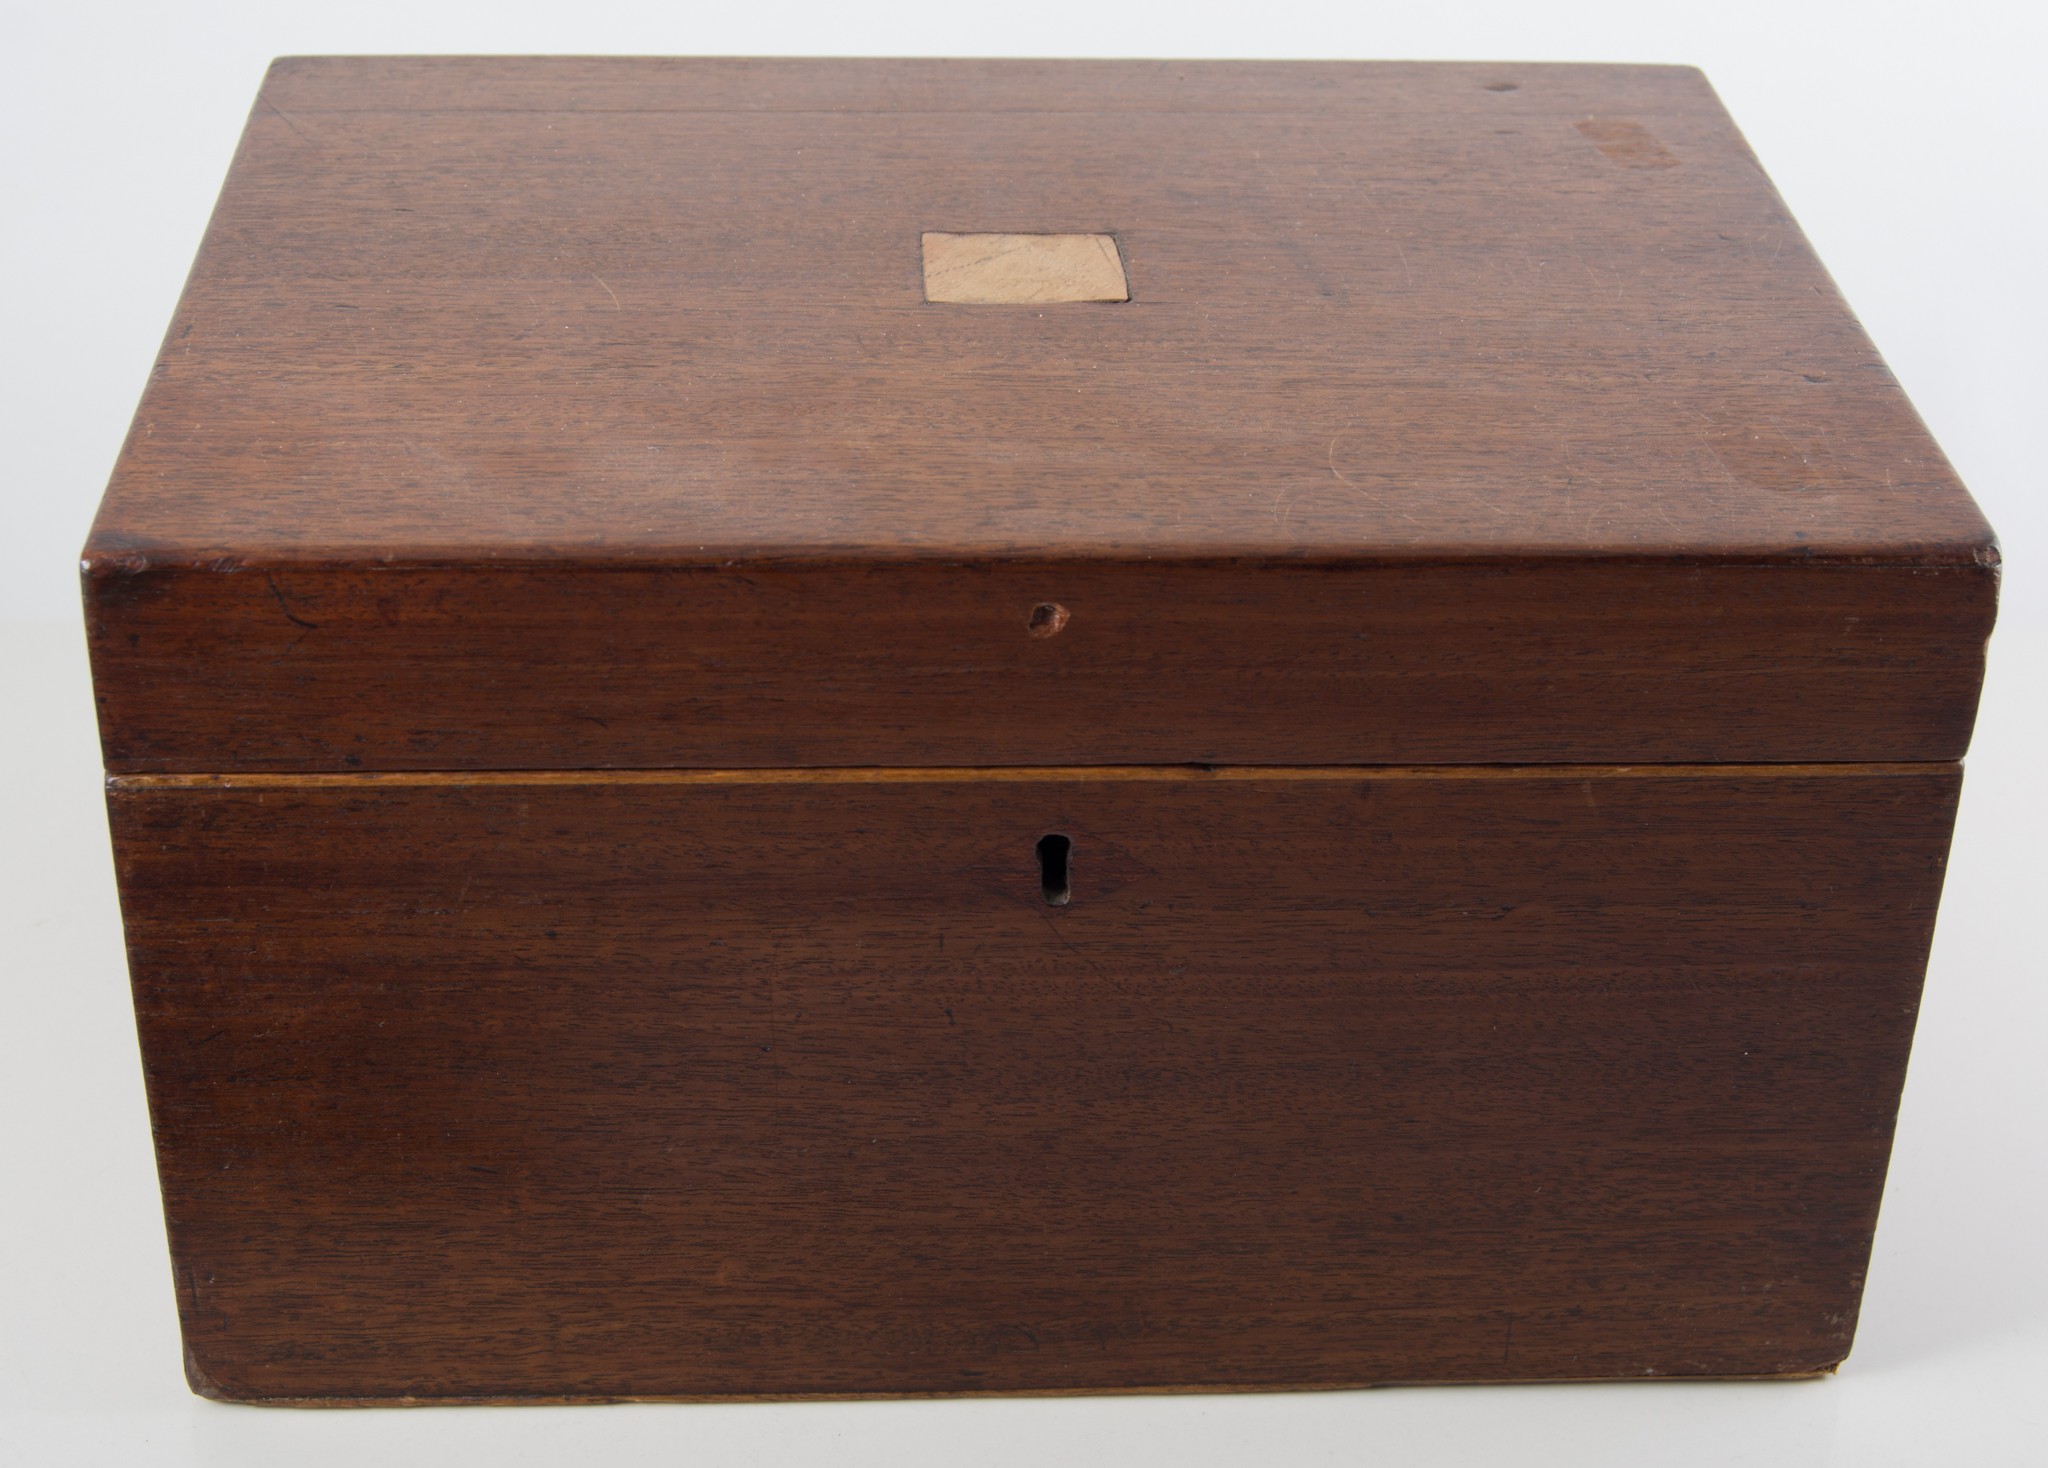 A rosewood tea caddy 26cm x 19cm x 15cm with three lidded tea compartments and baize lined